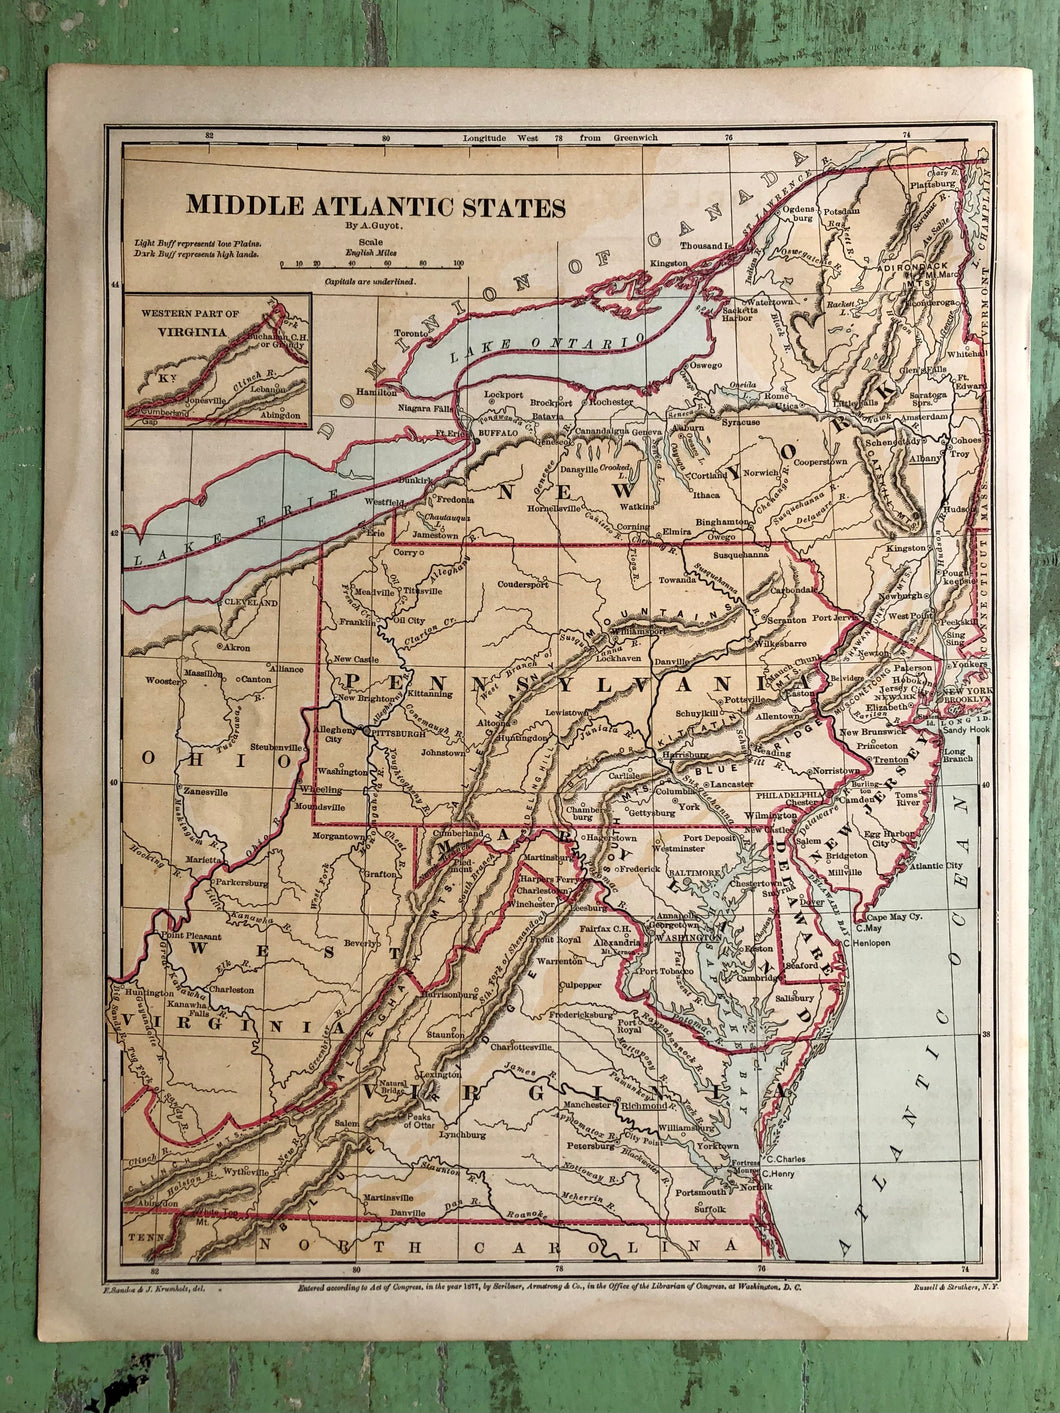 Map of Middle Atlantic States from Guyot's New Intermediate Geography